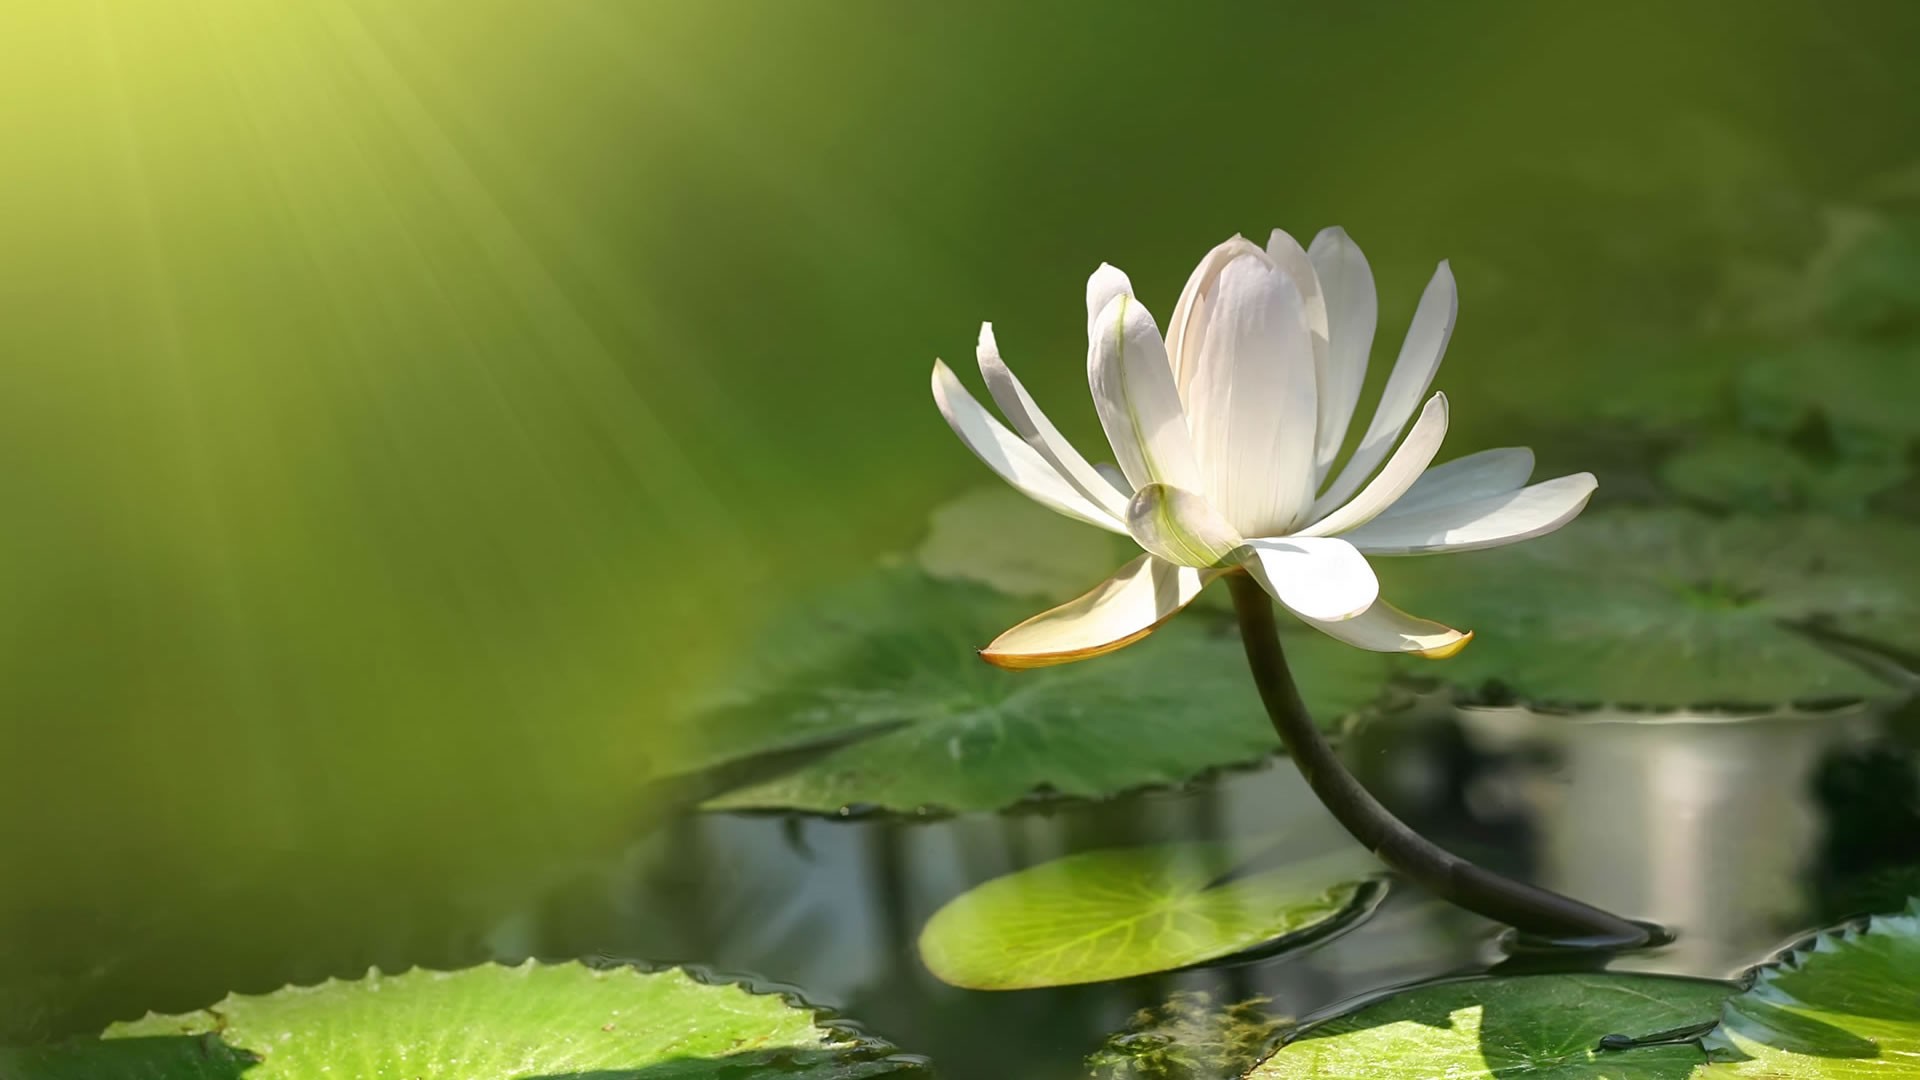 Wallpaper For Puters White Lotus Flower Exposed To Sunlight